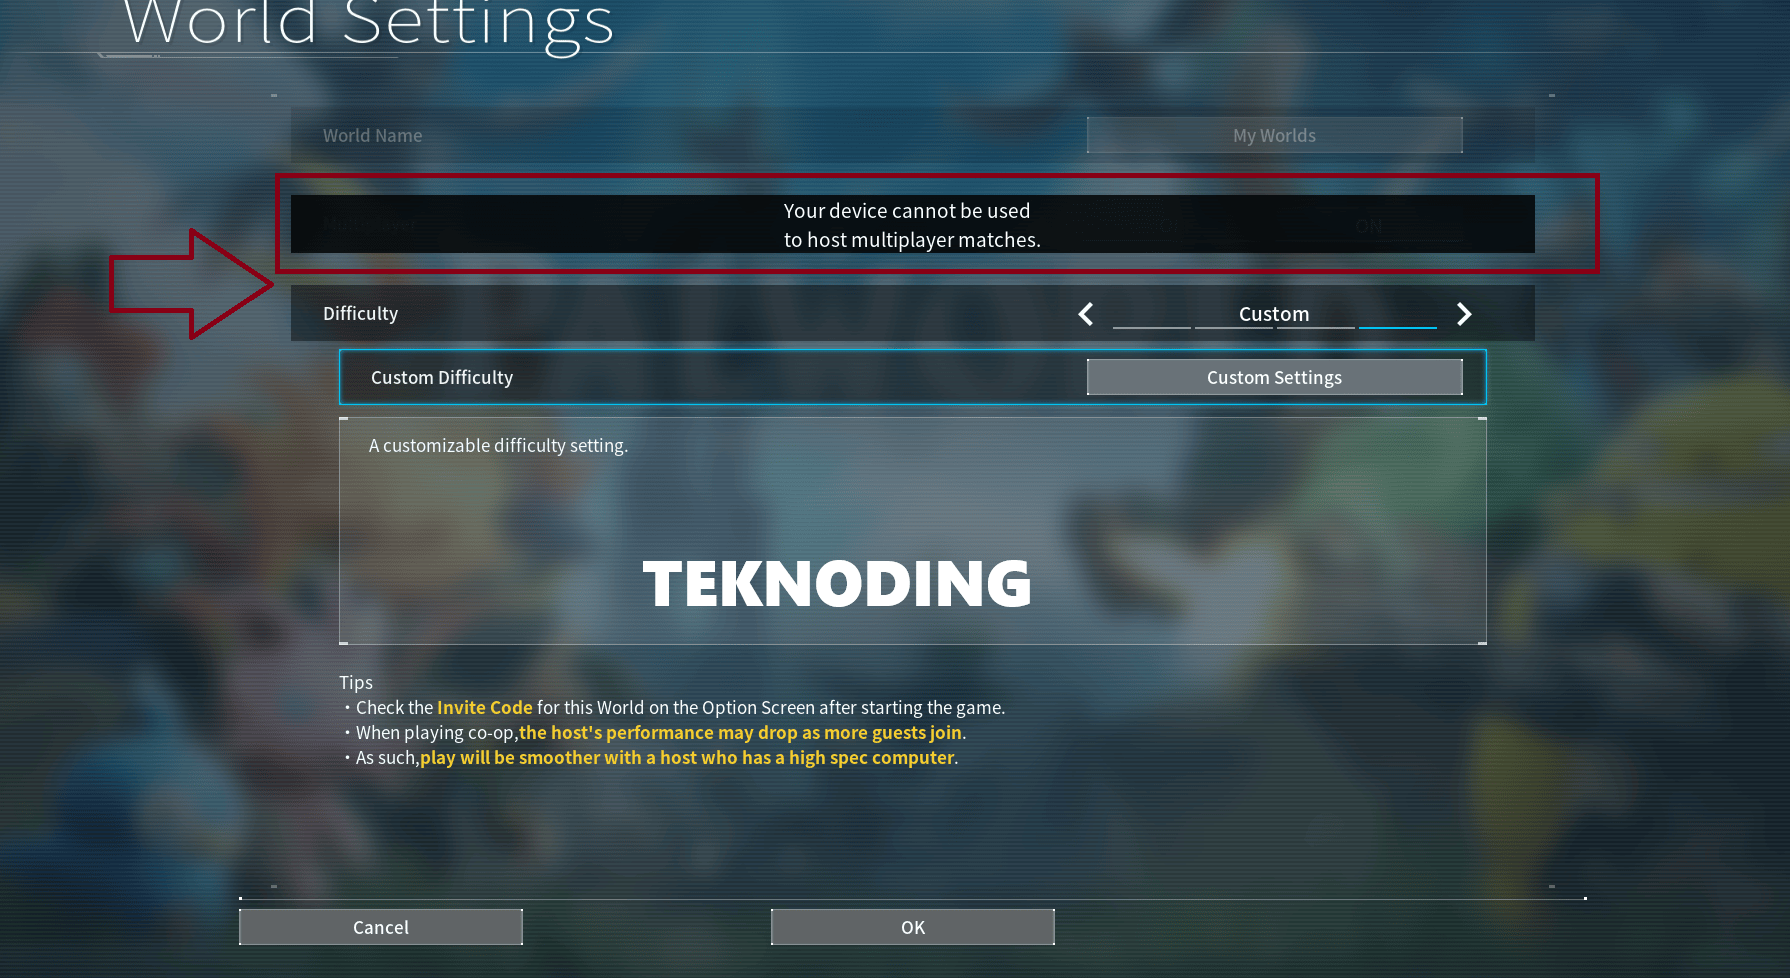 Your device cannot be used to host multiplayer matches palworld